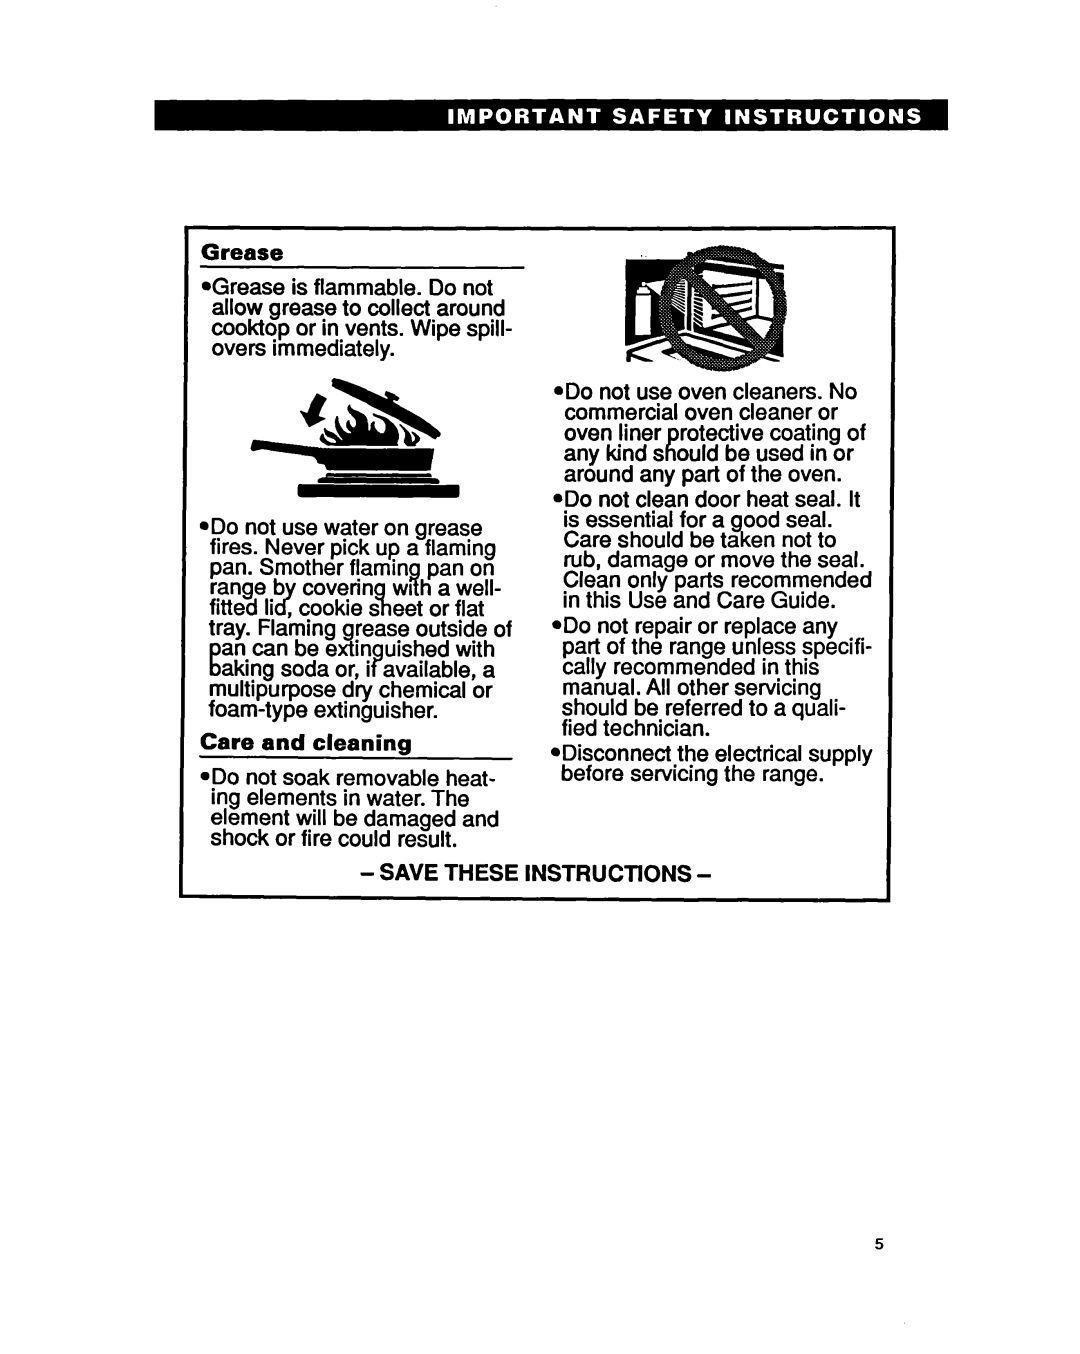 Whirlpool RF330PXY manual an can be extin uished with, Save These Instructions 